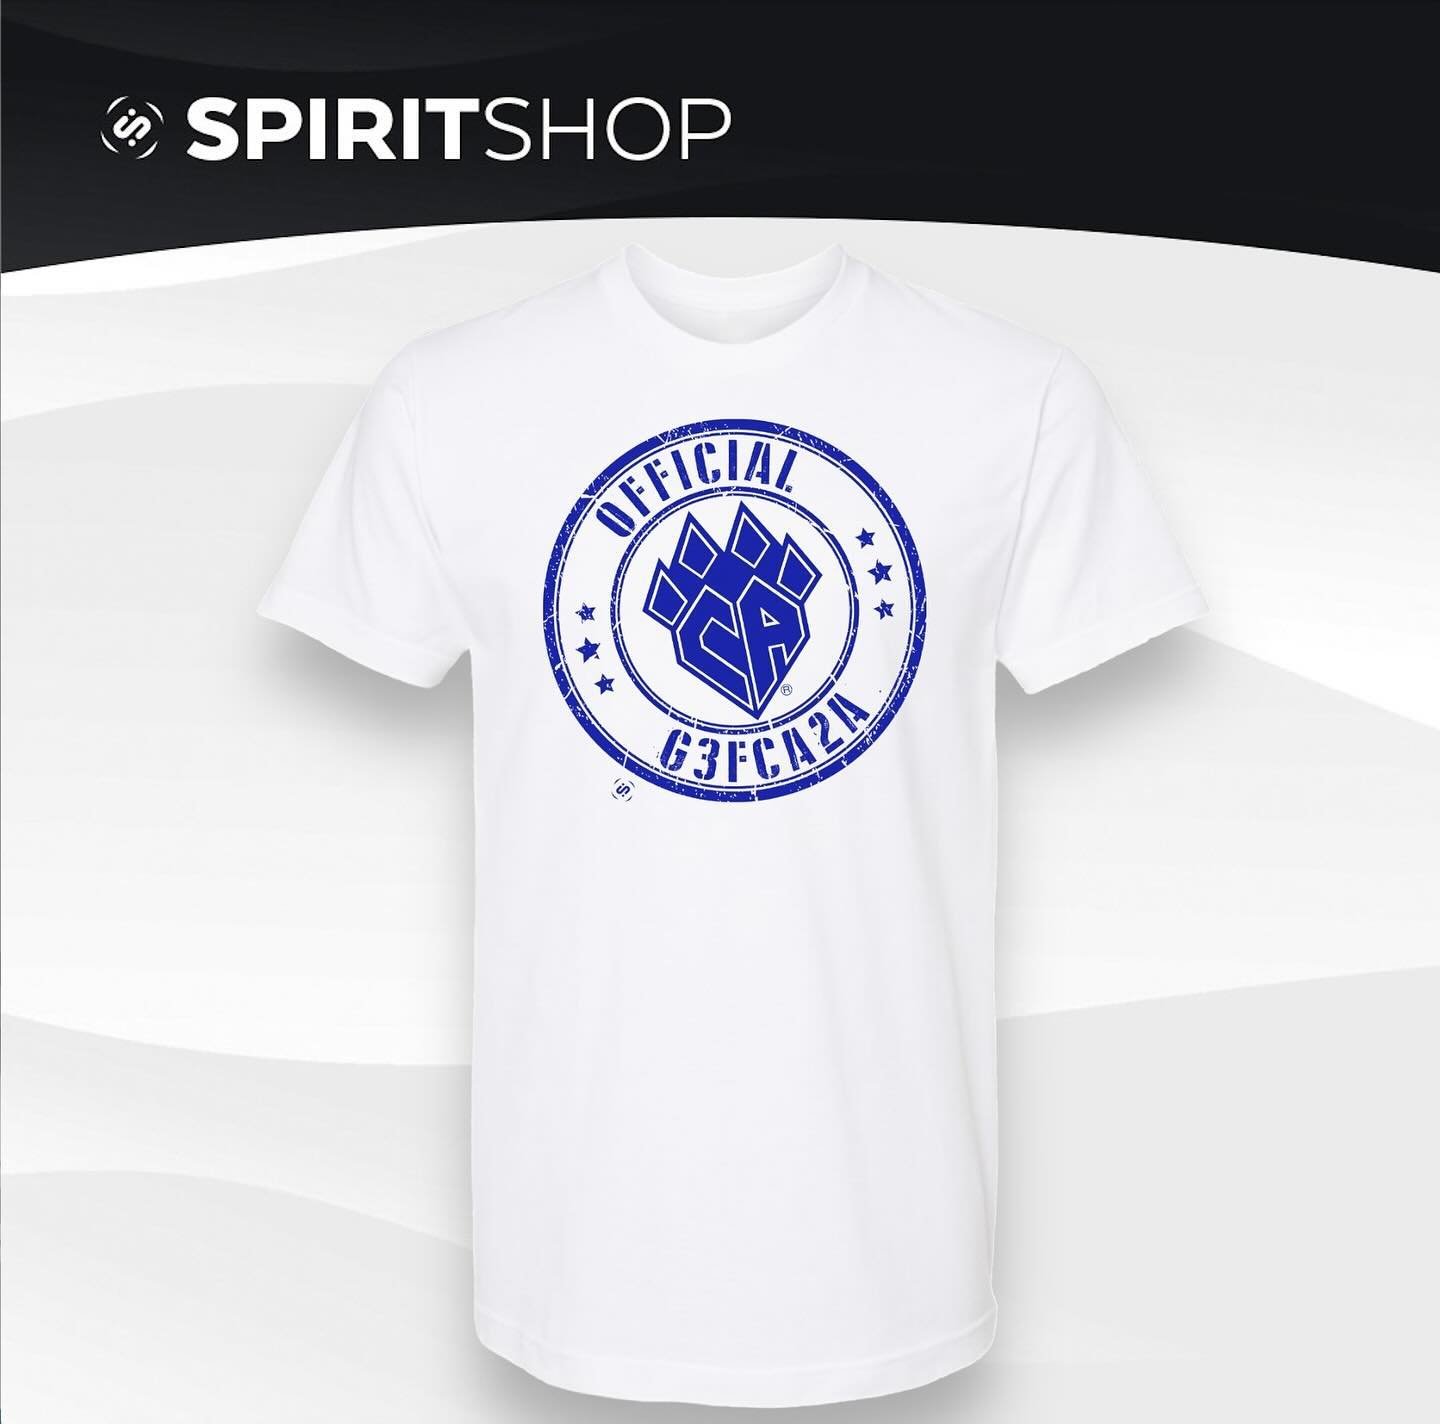 Make It OFFICIAL! 
NEW...Regular or Cropped Screen Printed T-Shirts. These will make for a GREAT Team Placement/Tryout Gift for your athlete.  Shop Now!
www.innovativespiritwear.com/cheer-athletics